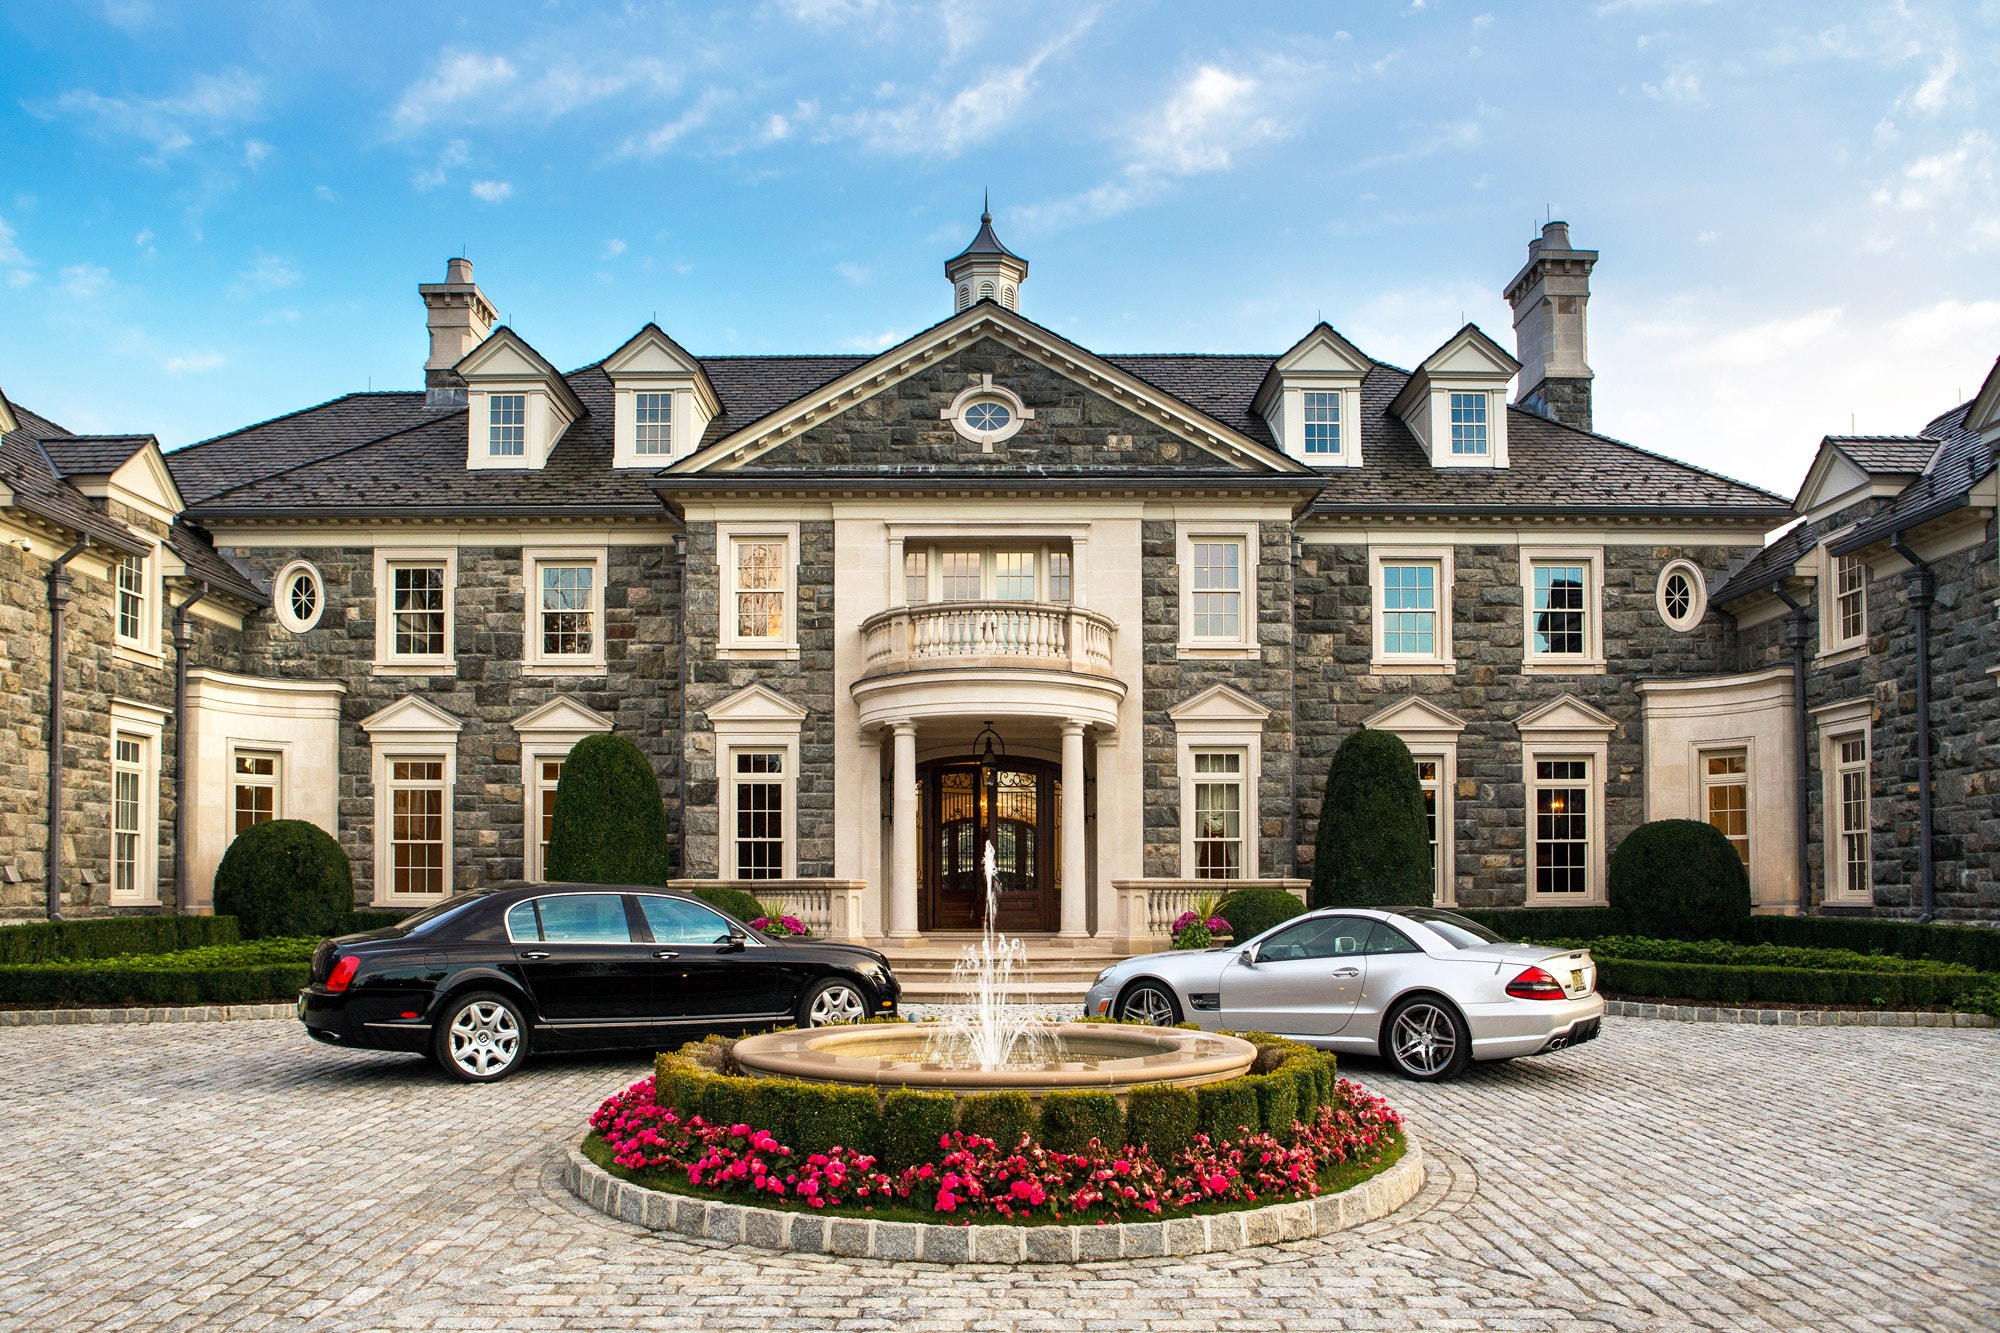 Free photo: Big Mansion - Architecture, Building, Engineering - Free ...